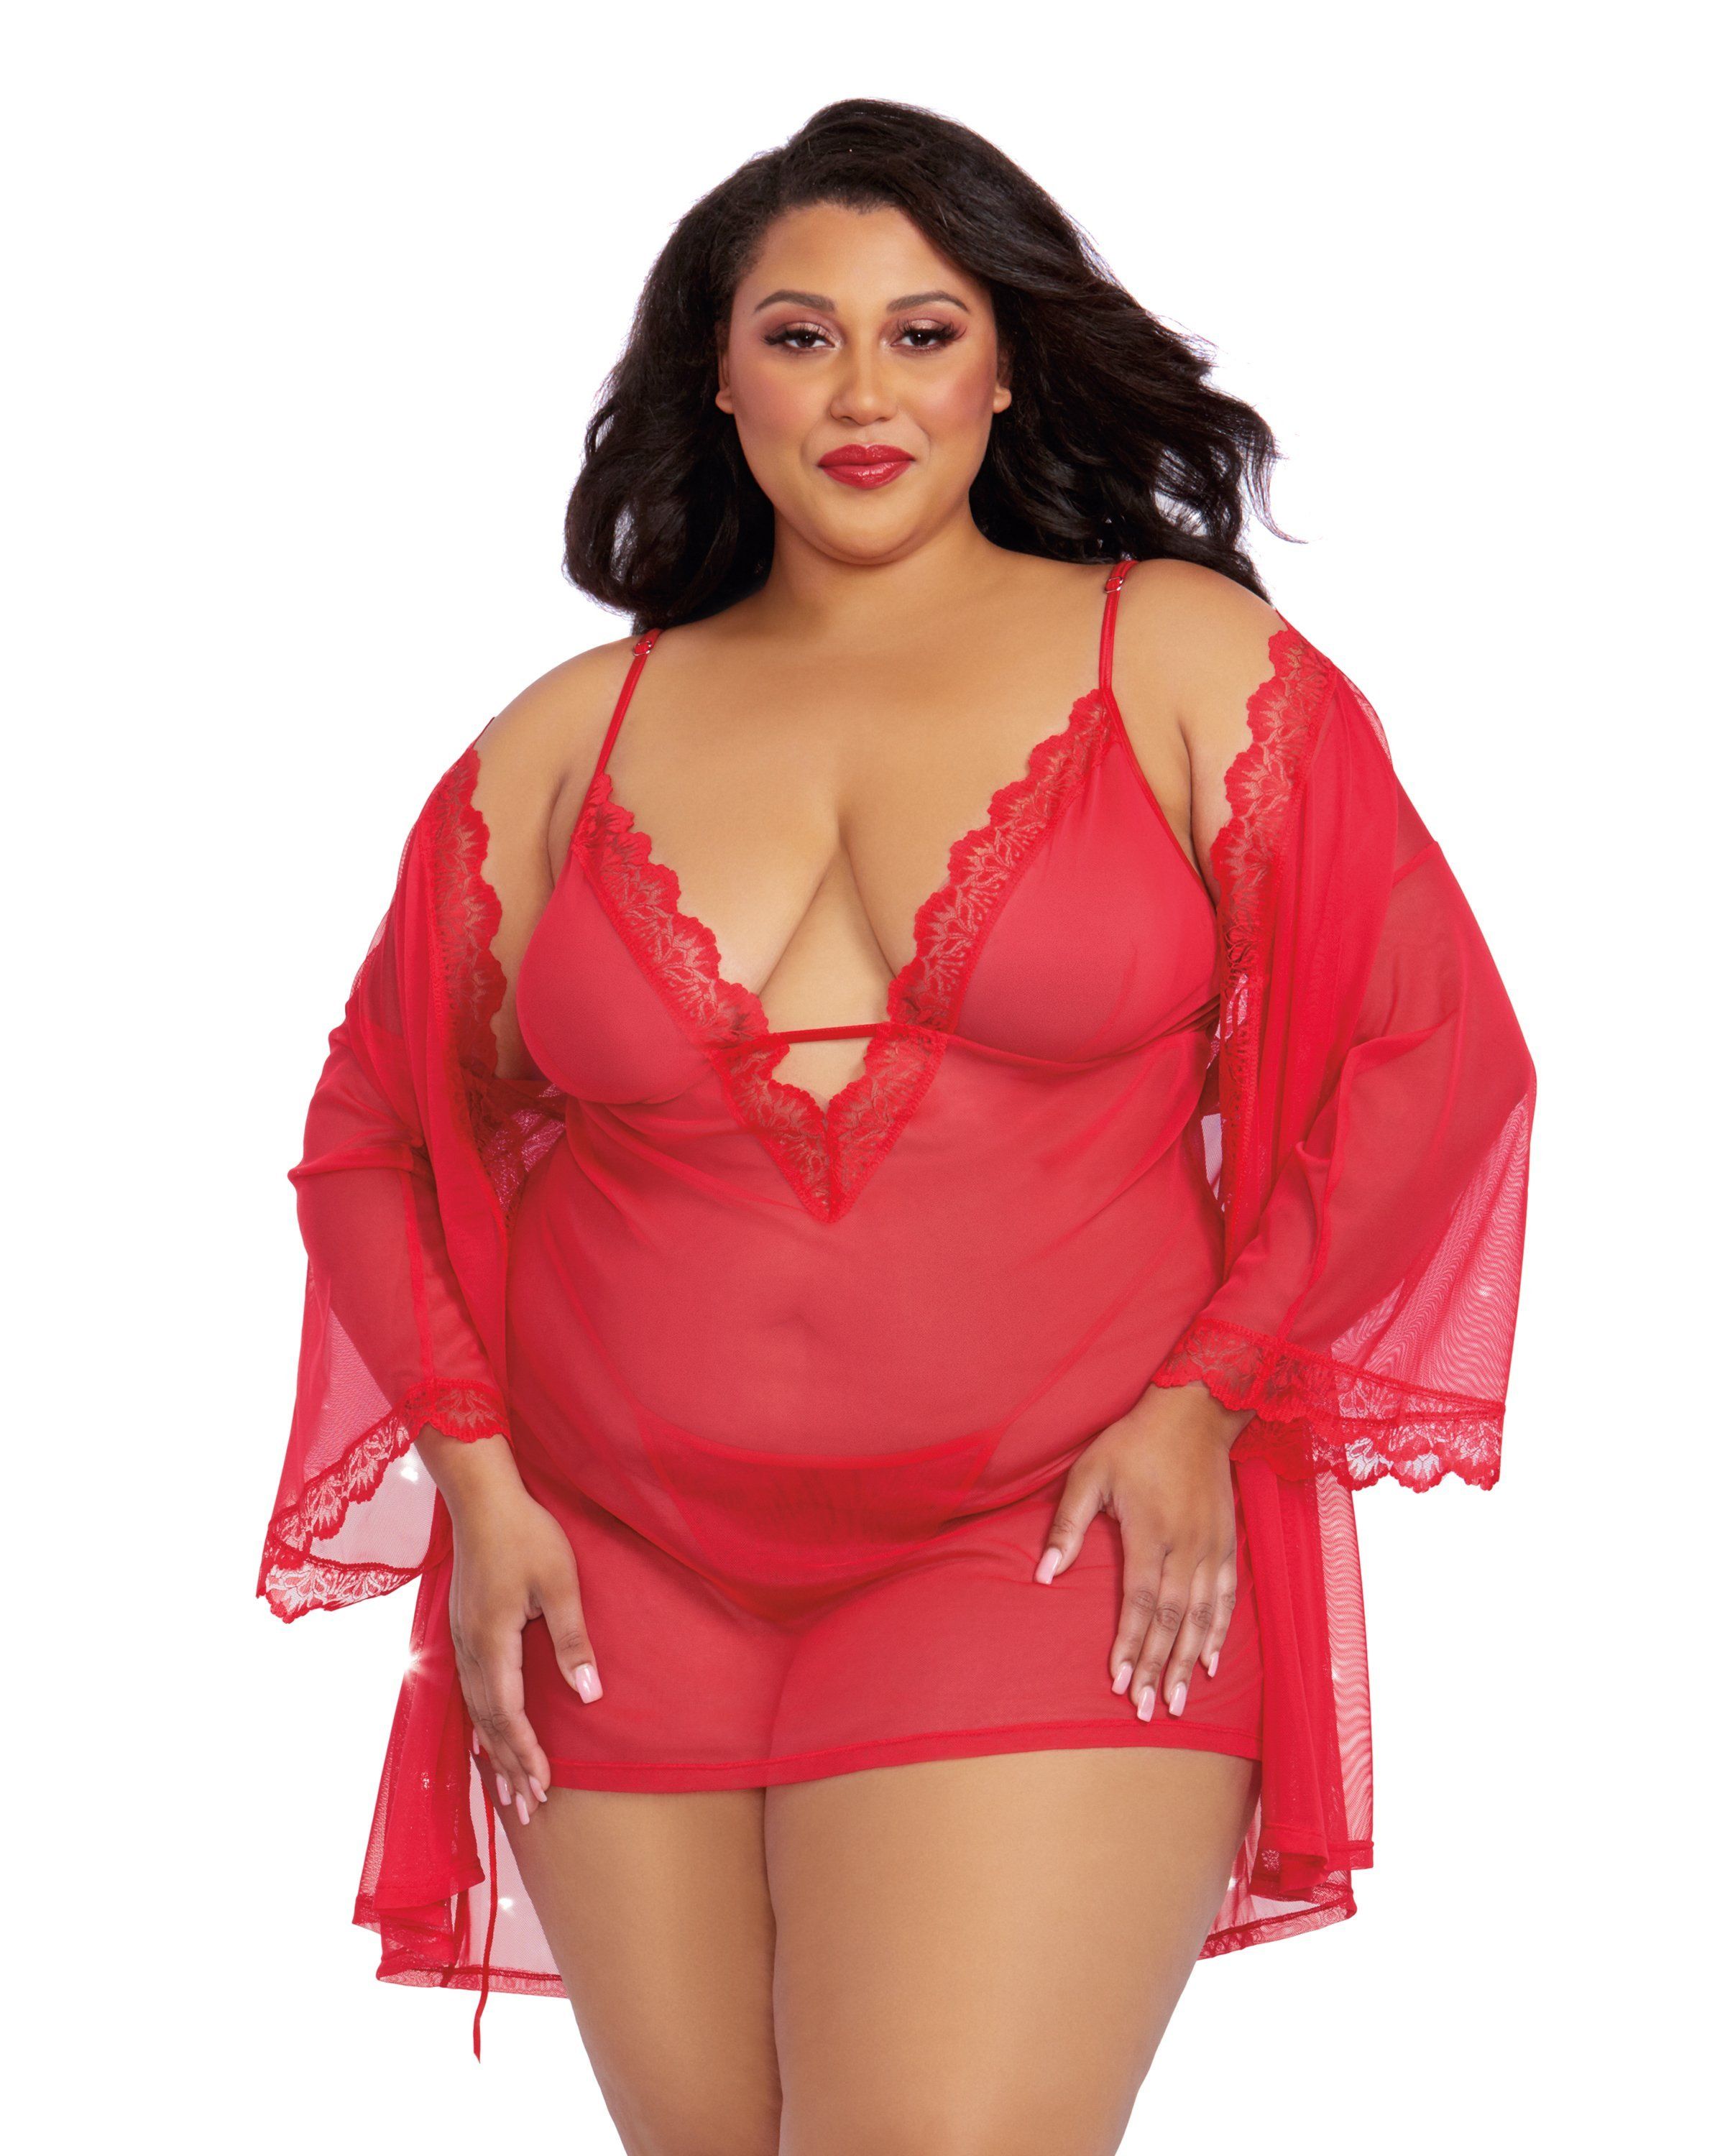 Dreamgirl Plus Size Chemise & Mesh Robe Set with Matching G-String